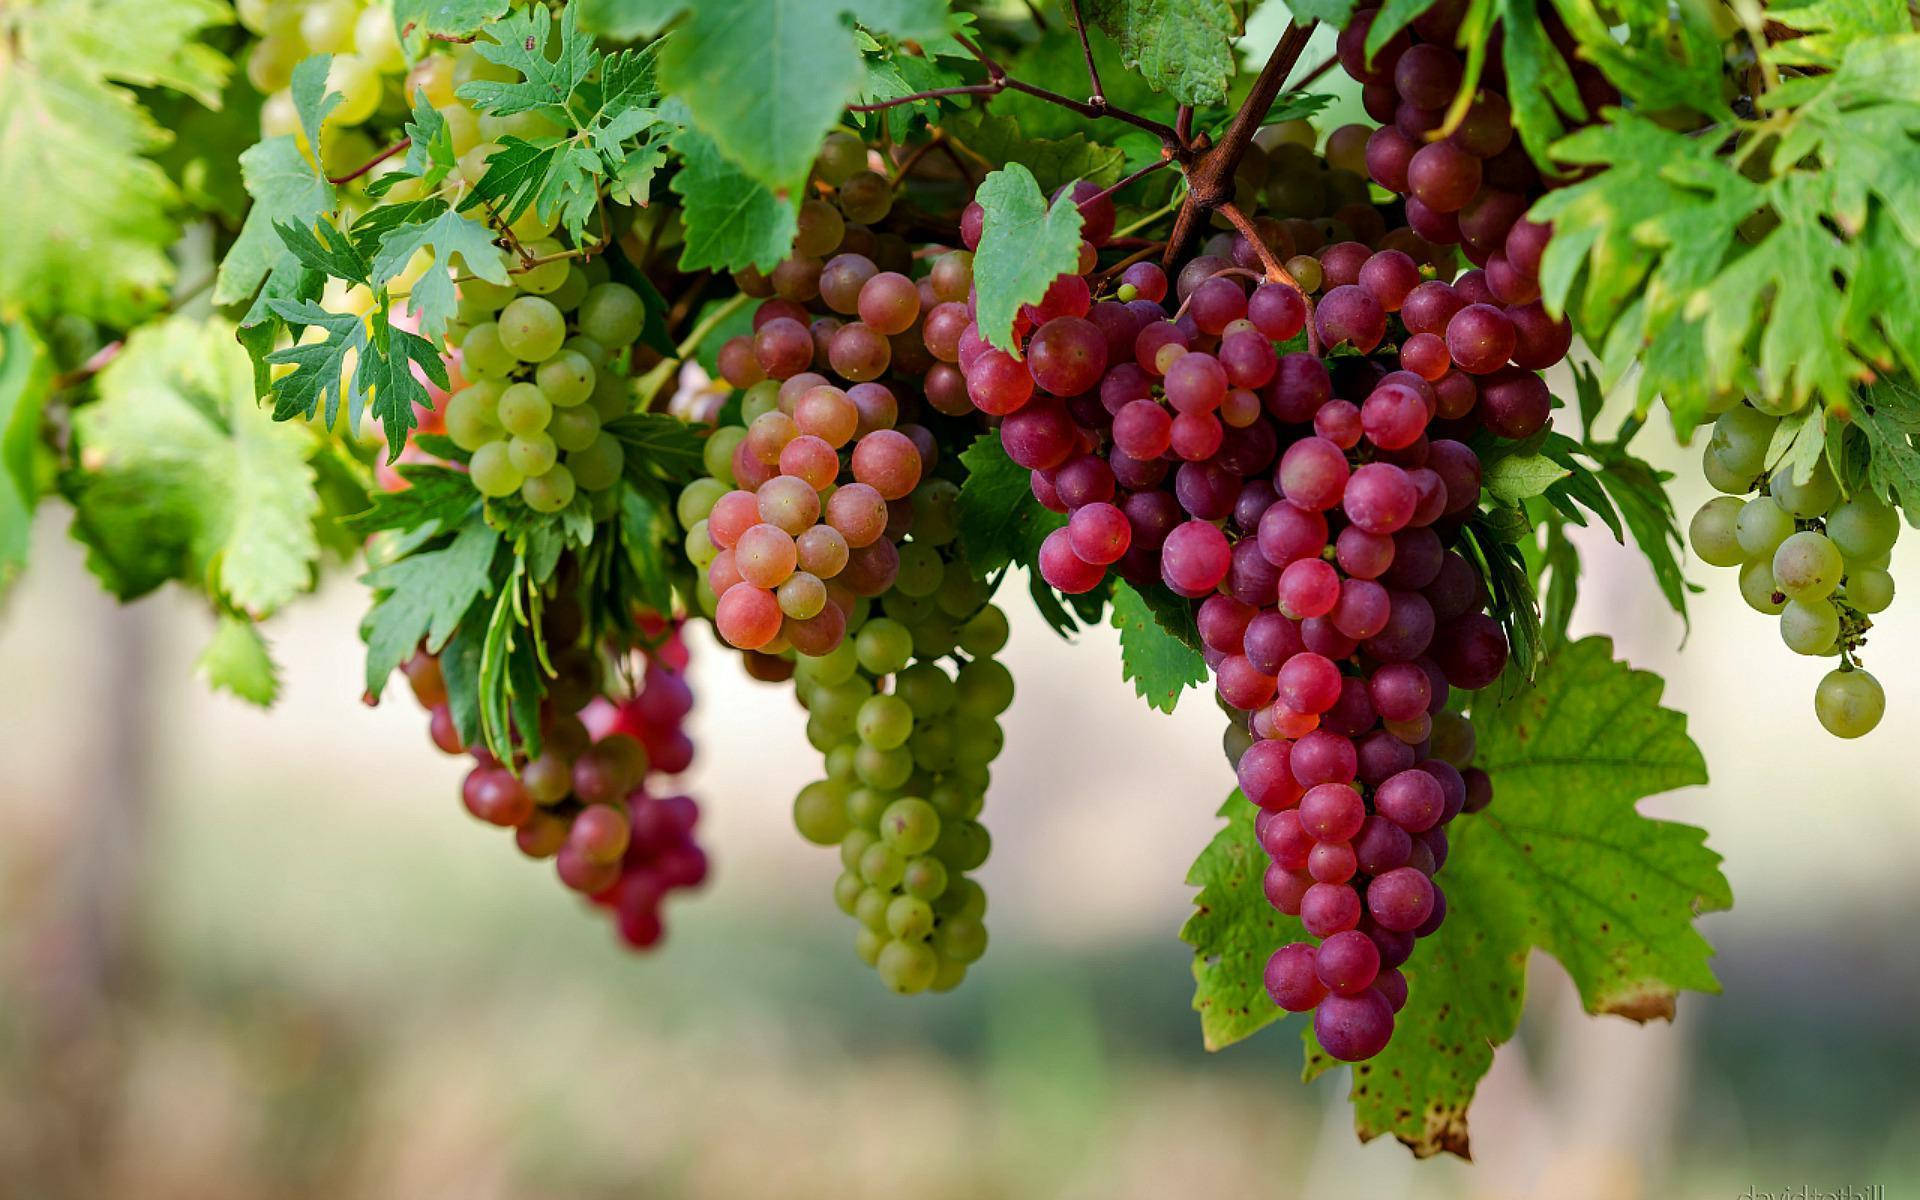 https://wallpapers.com/images/hd/bunch-of-flame-seedless-red-grapes-3xjpxsn52x9l9zxa.jpg